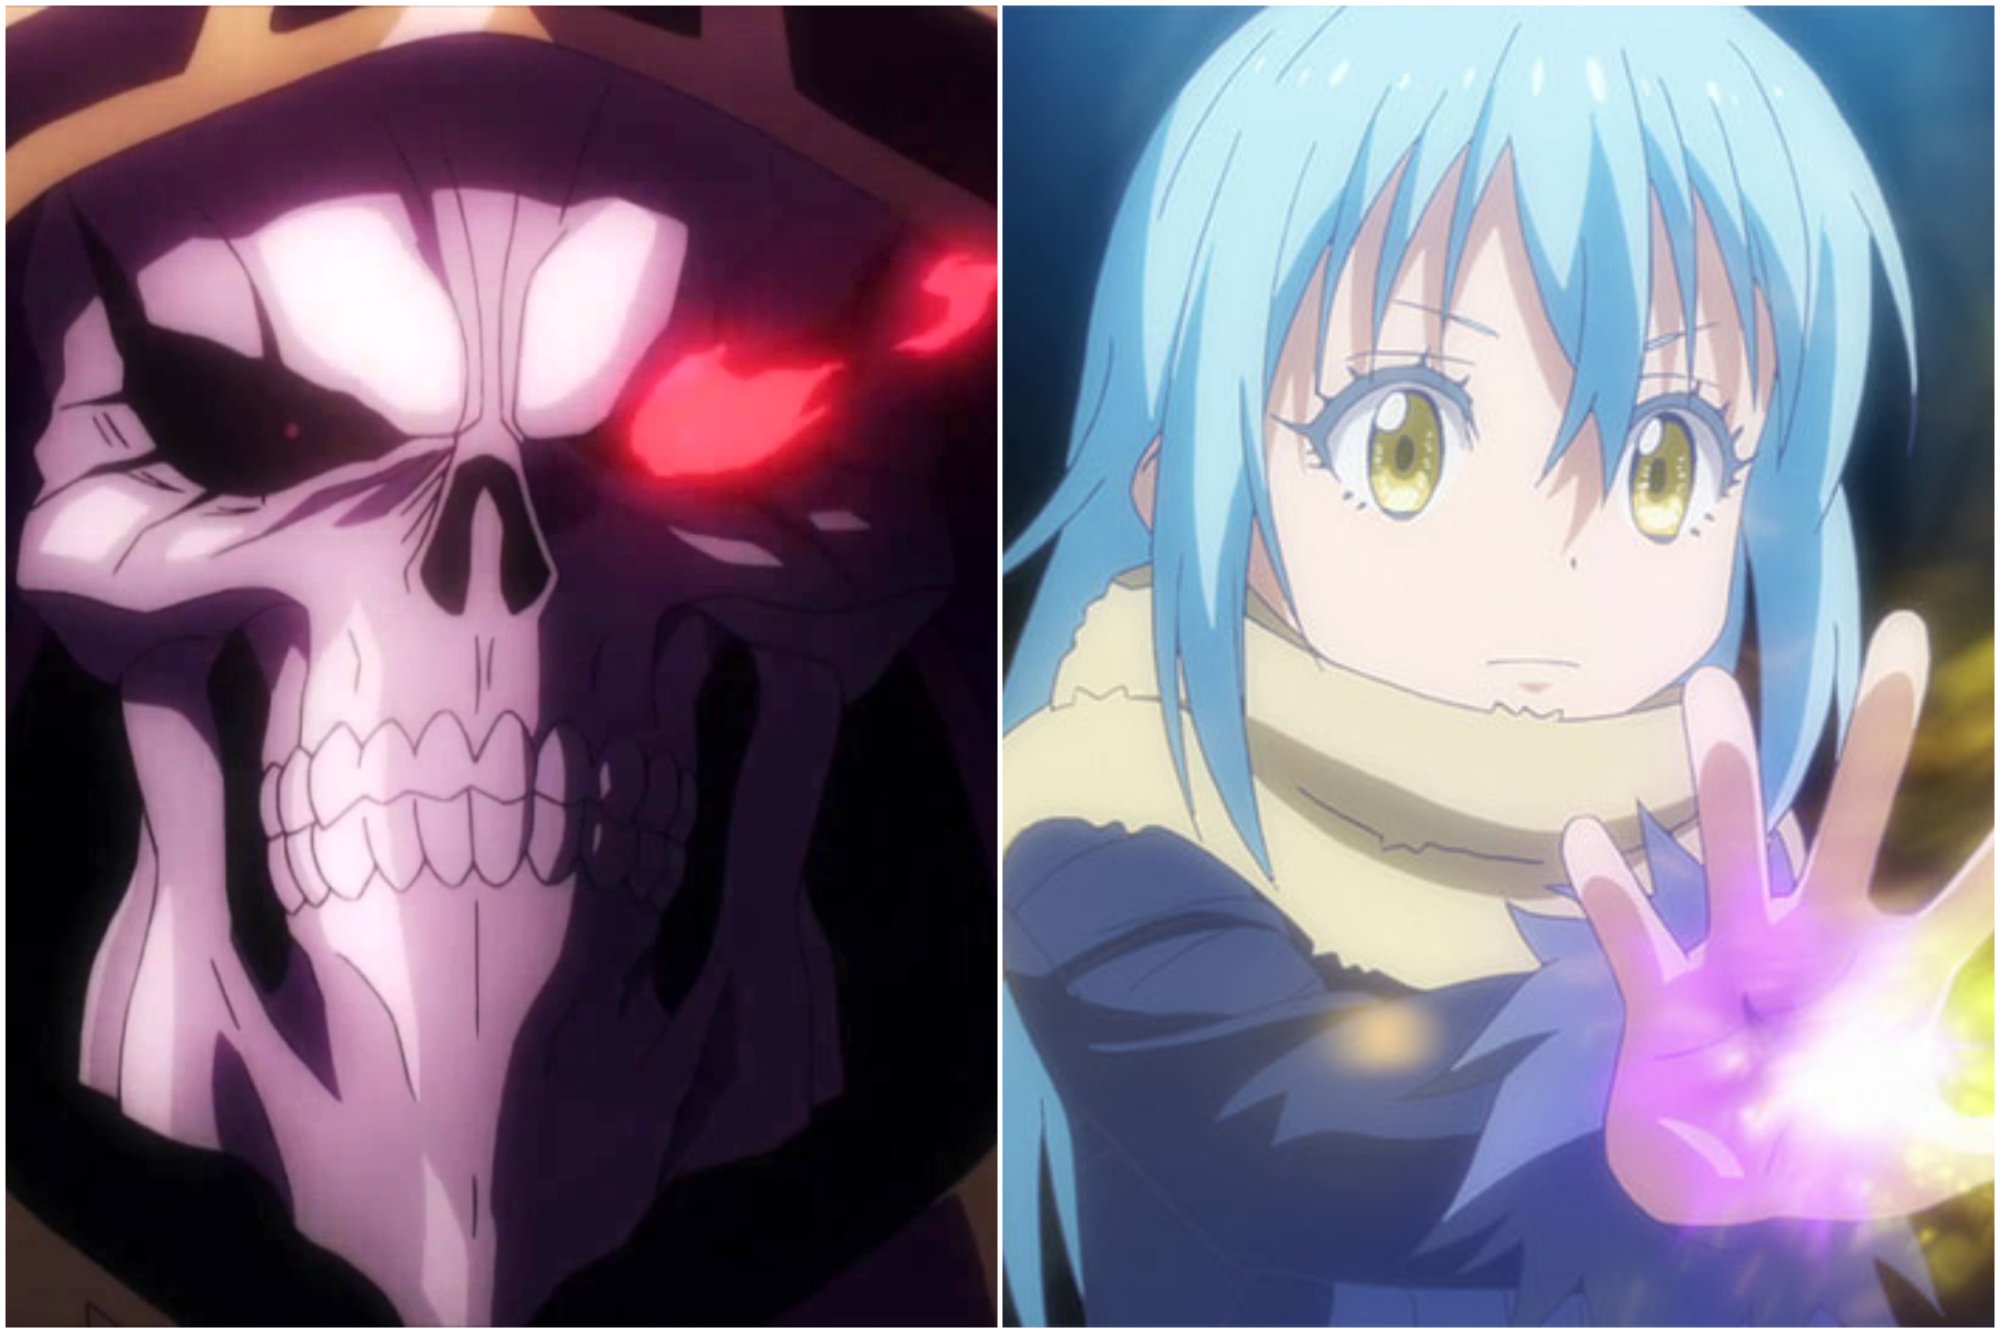 That Time I Got Reincarnated As A Slime inspires a new spin-off manga series